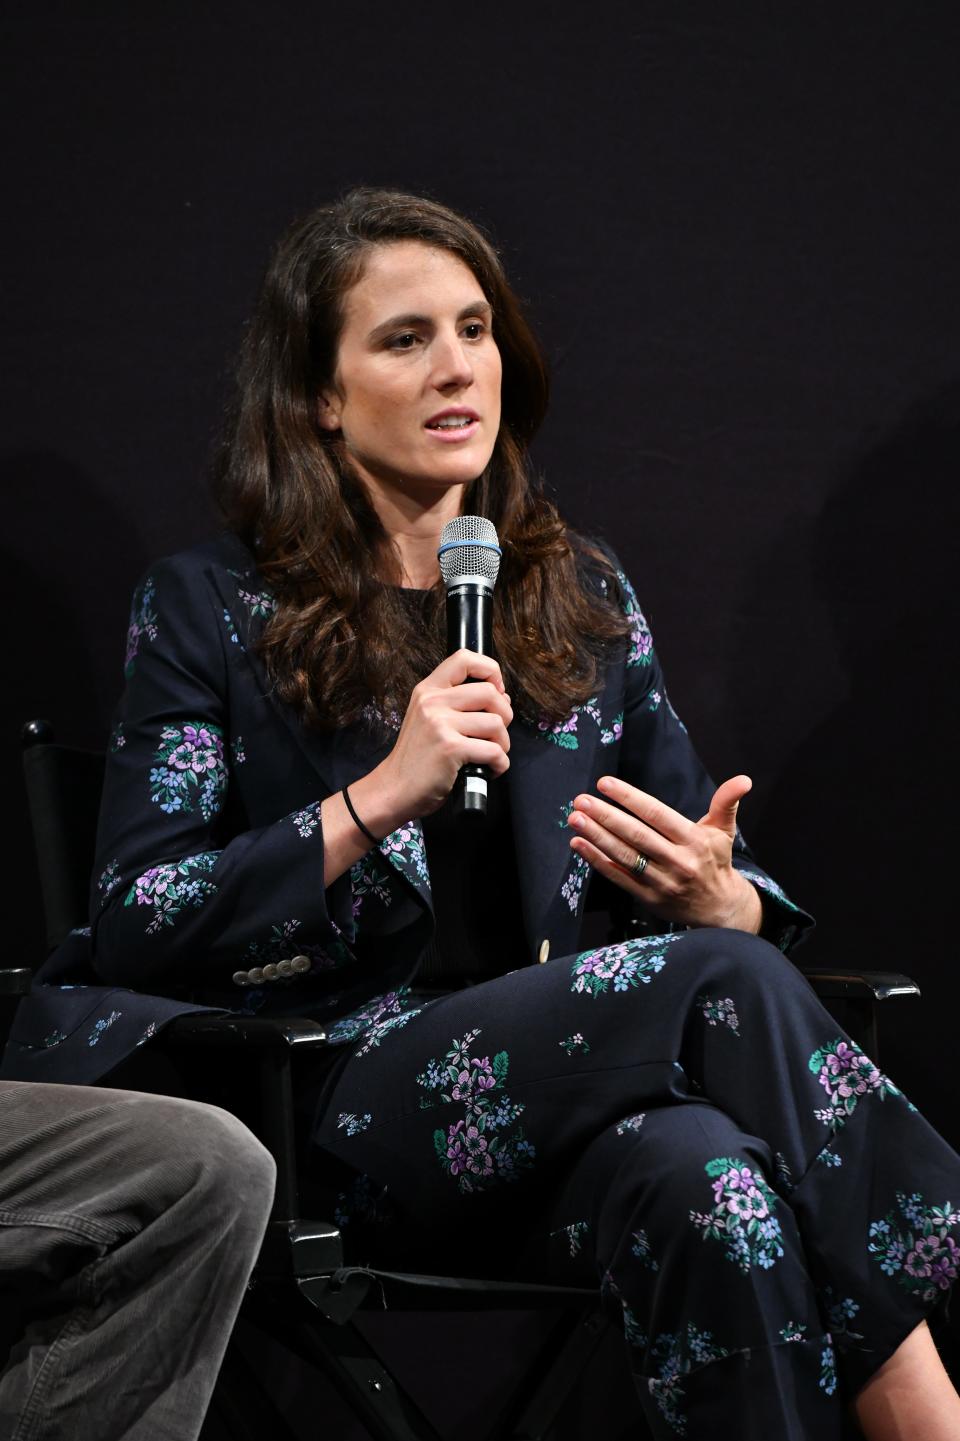 NEW YORK, NEW YORK - SEPTEMBER 05: Tatiana Schlossberg attends Intelligencer Live: Our Warmer Future presented by New York Magazine and Brookfield Place on September 05, 2019 in New York City. (Photo by Craig Barritt/Getty Images for New York Magazine)